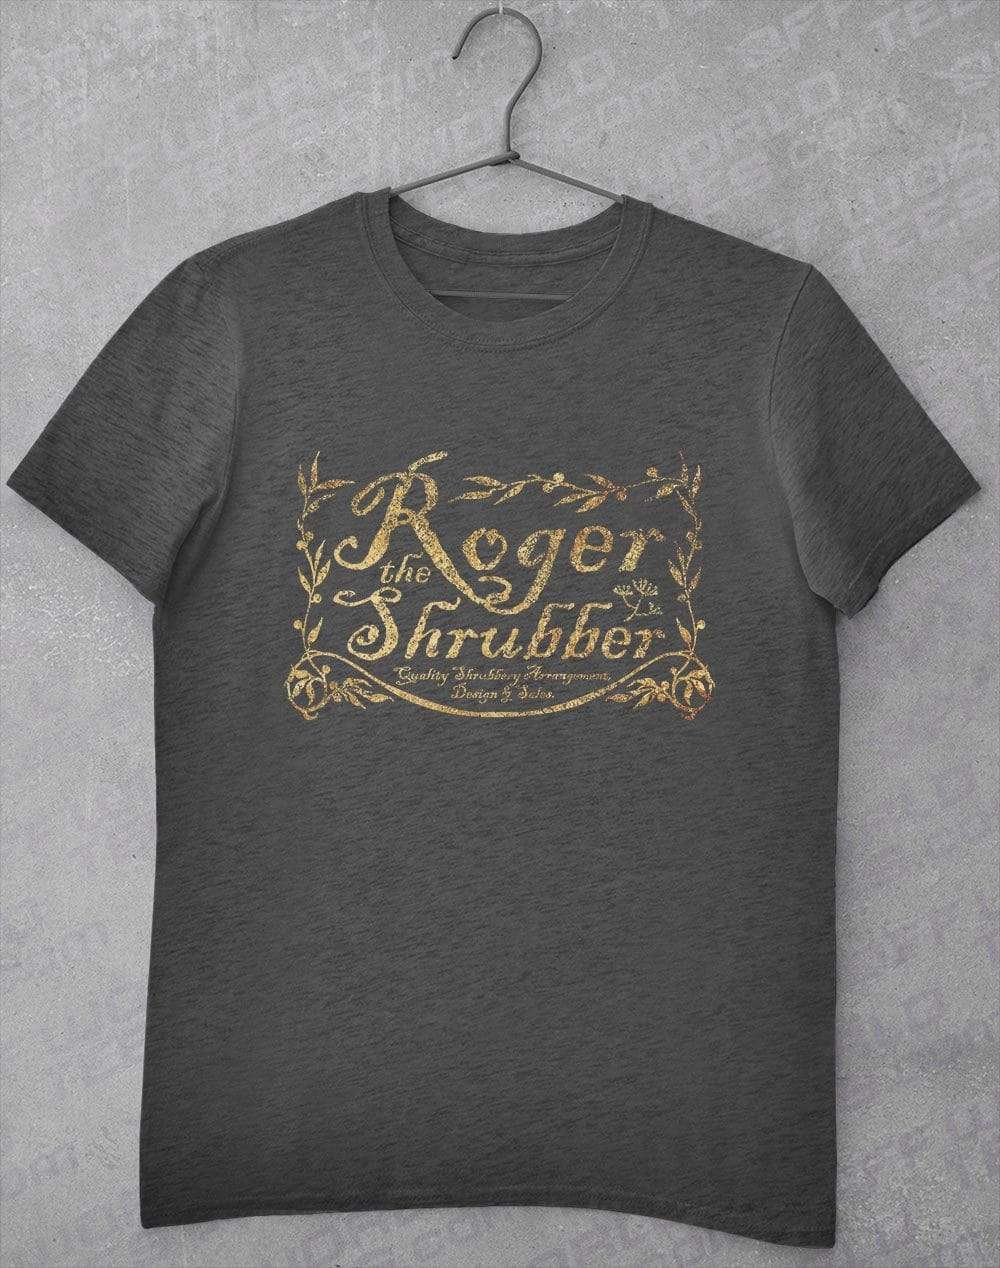 Roger the Shrubber T-Shirt S / Dark Heather  - Off World Tees